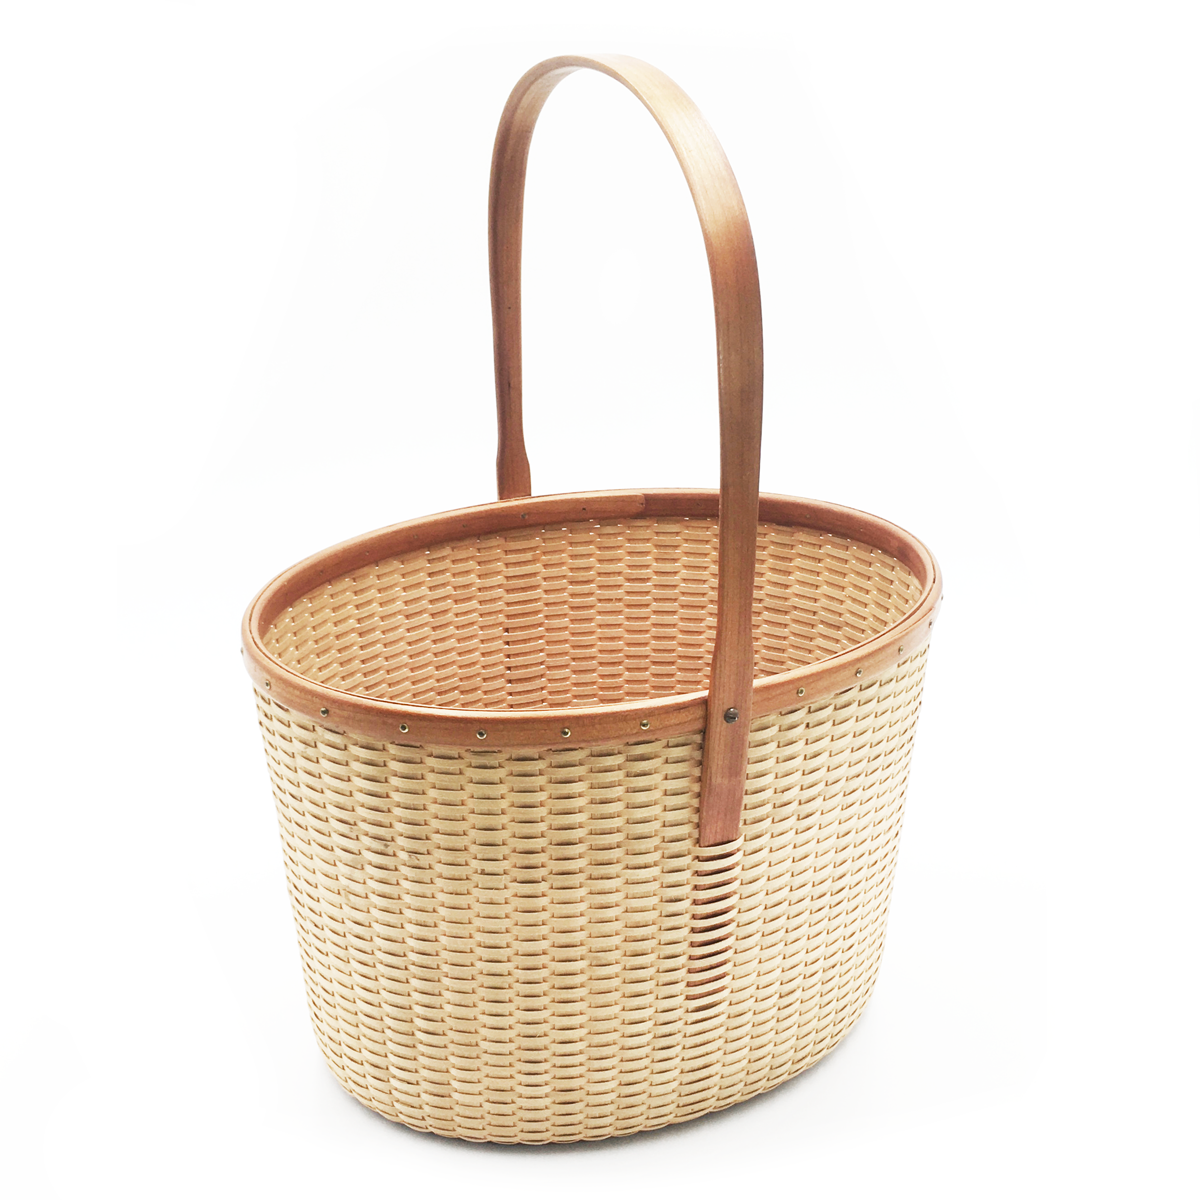 Gallery – Eric Taylor Basketry